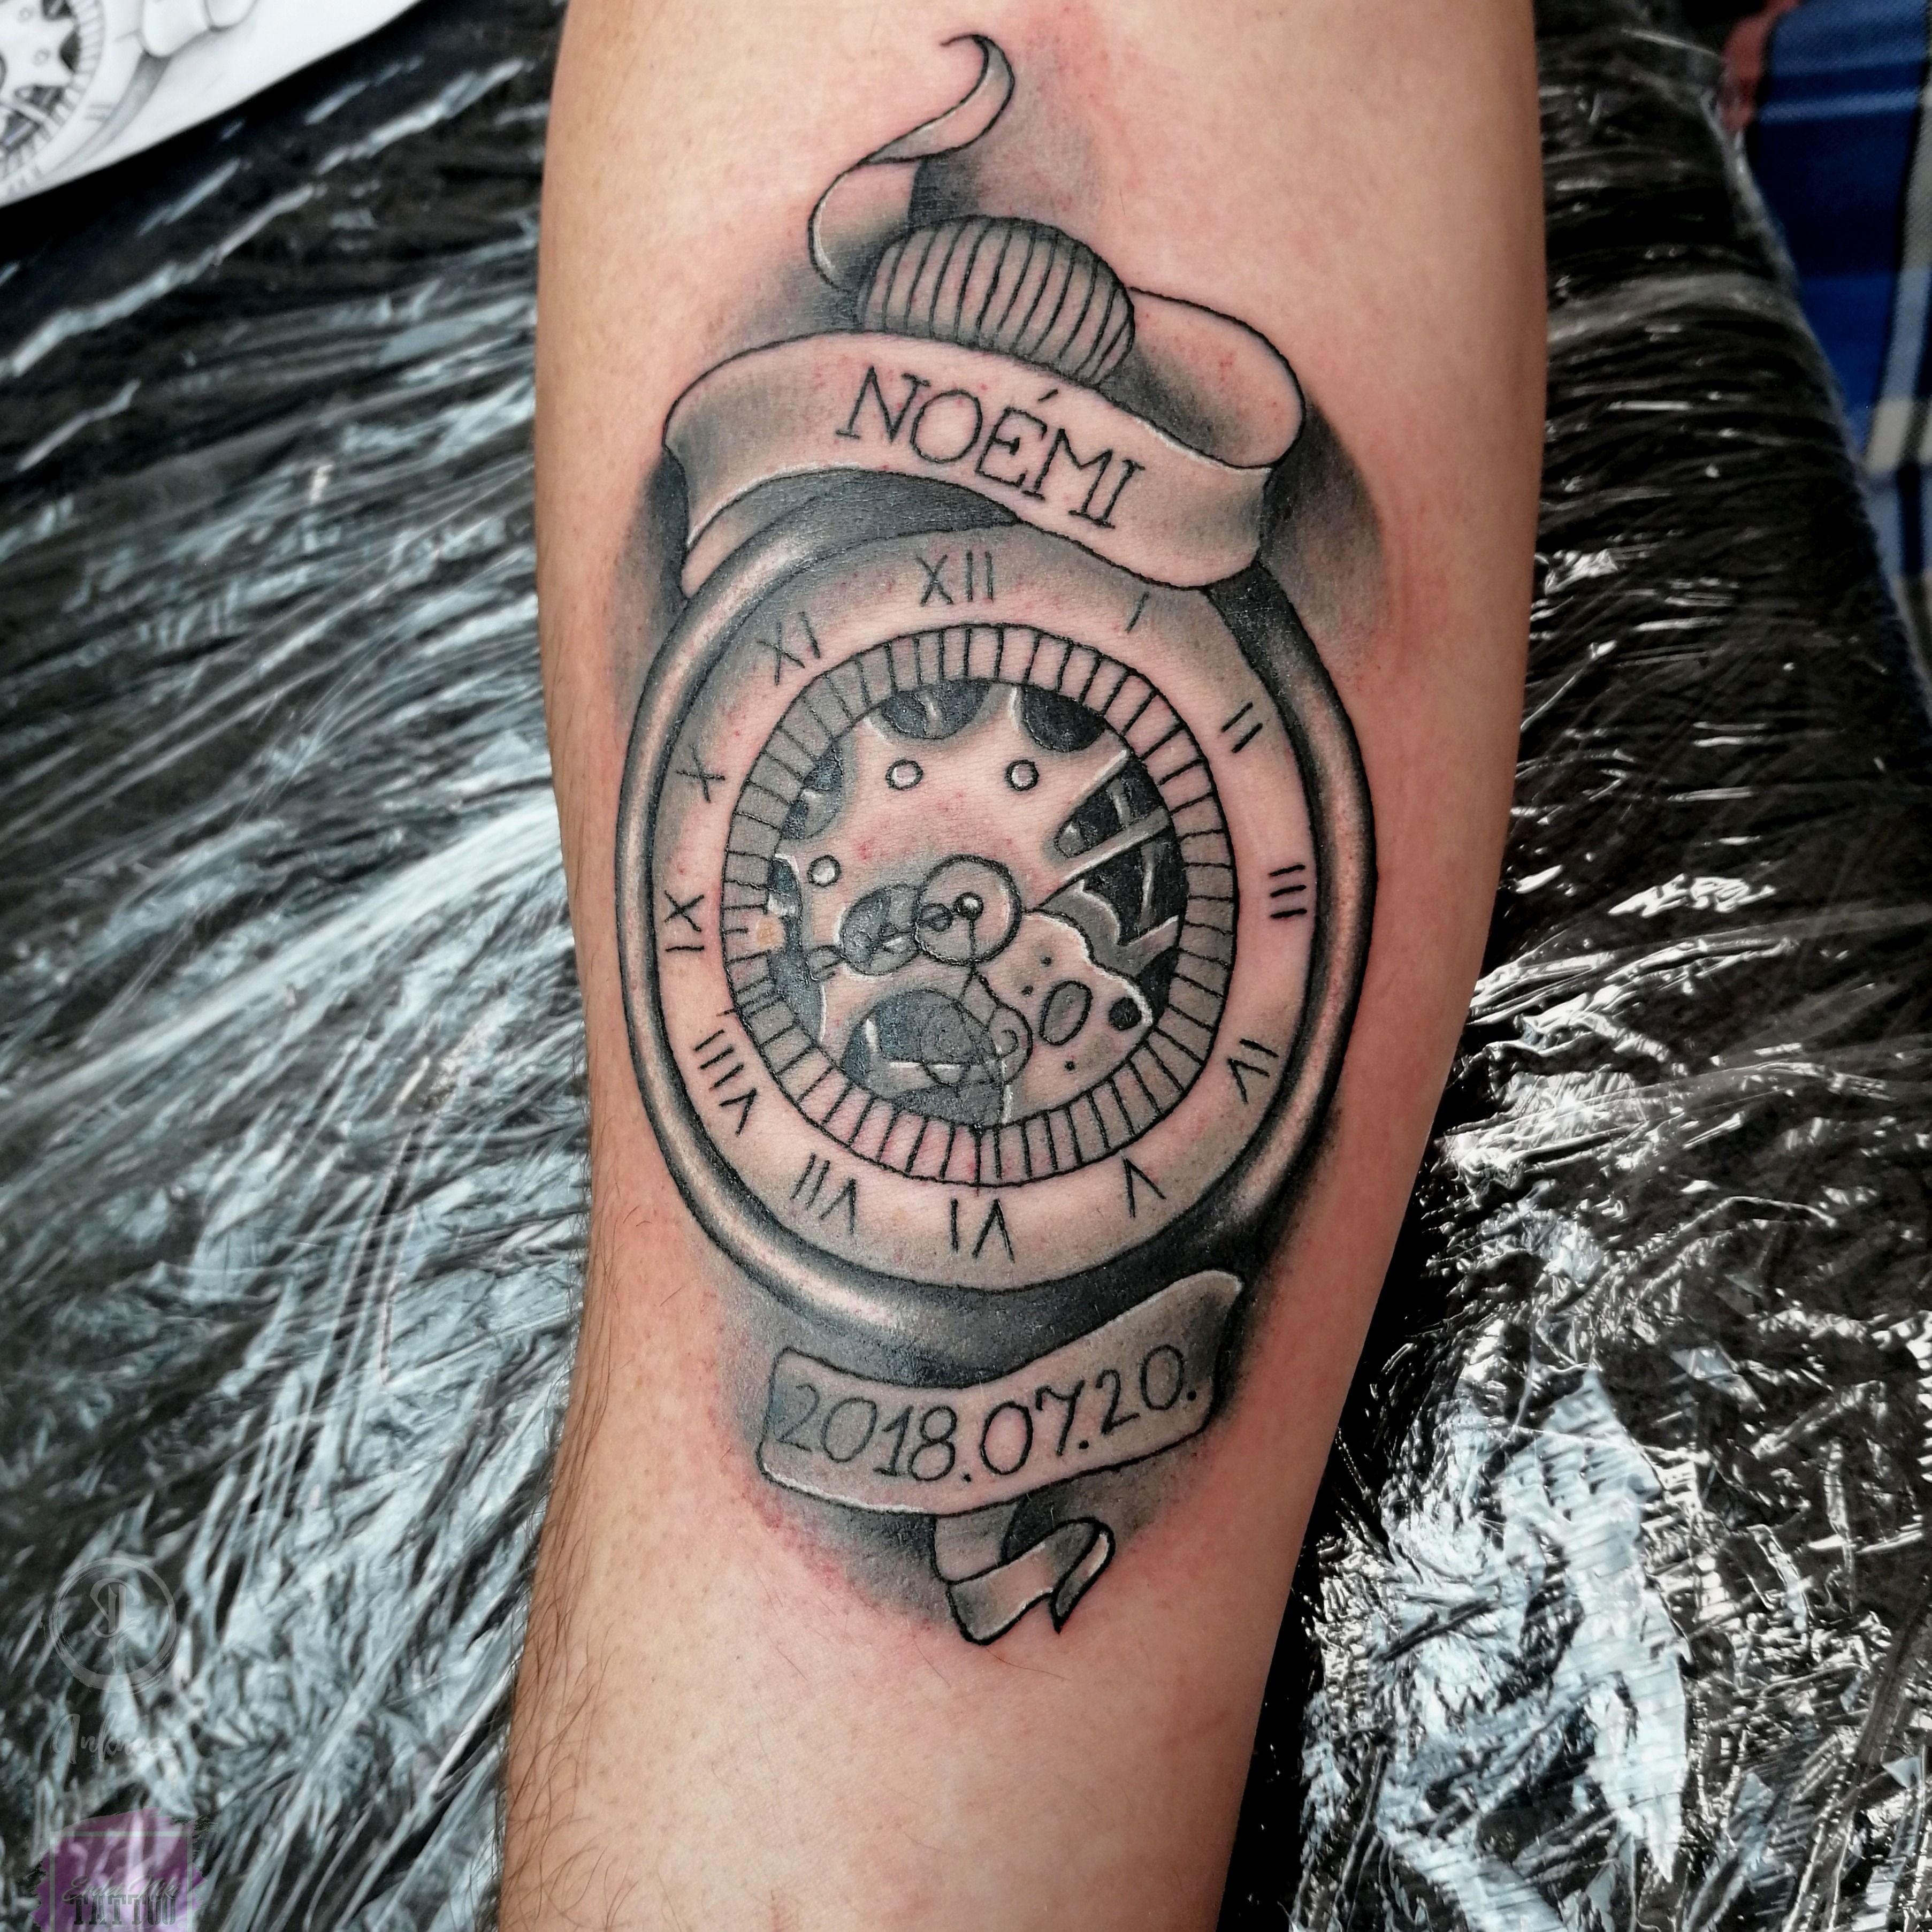 Tattoo uploaded by Erdei Niki • Clock tattoo for a father with his daughter's  name and birthdate. • Tattoodo